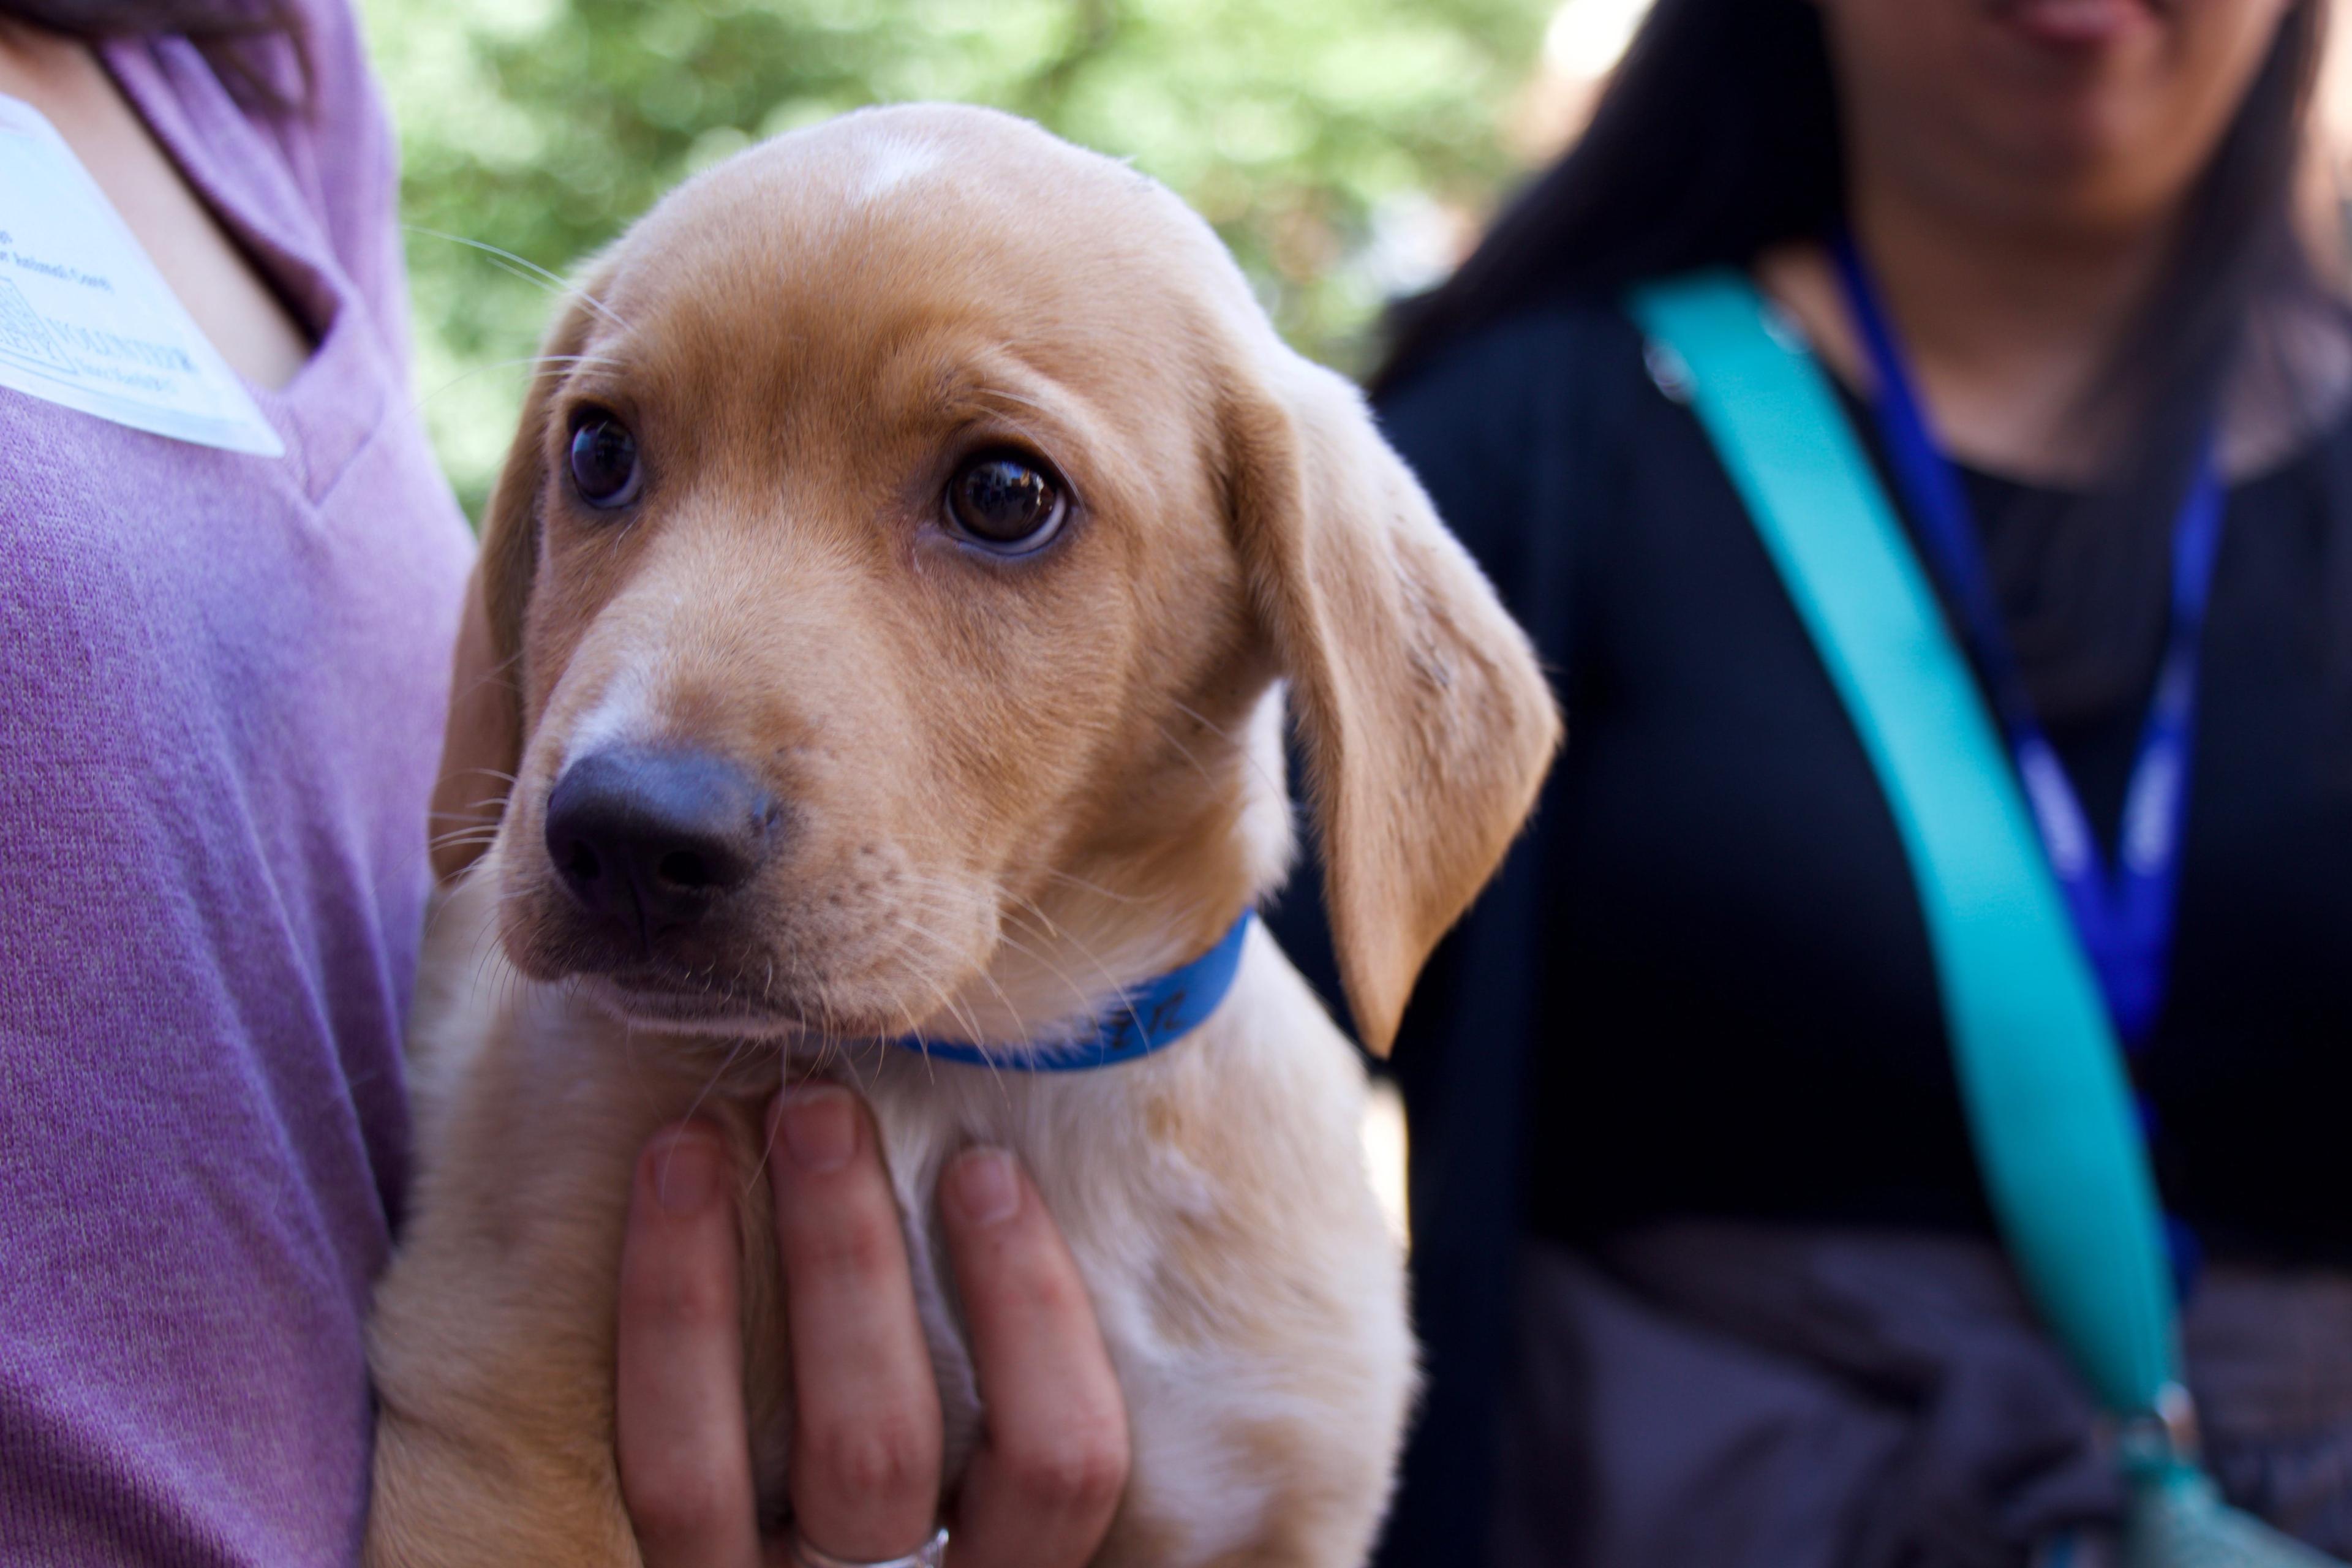 close-up image of a puppy being held